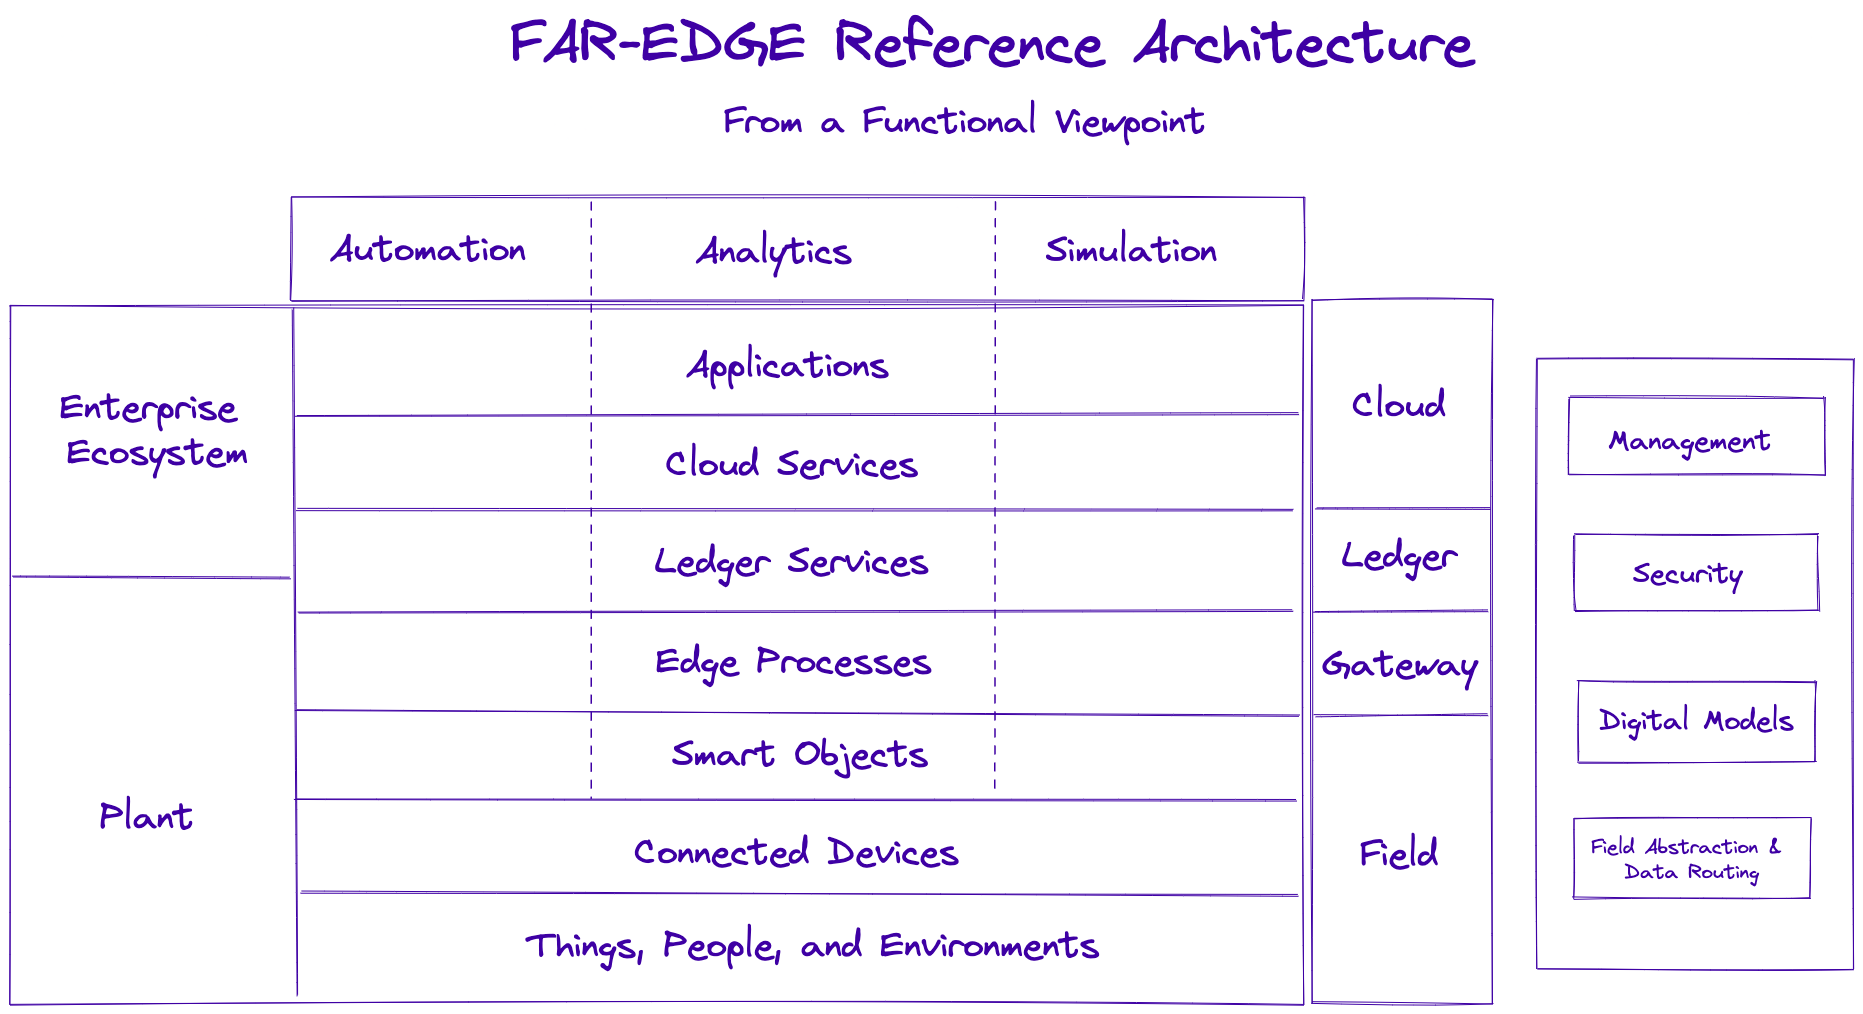 A functional view of the FAR-EDGE reference architecture